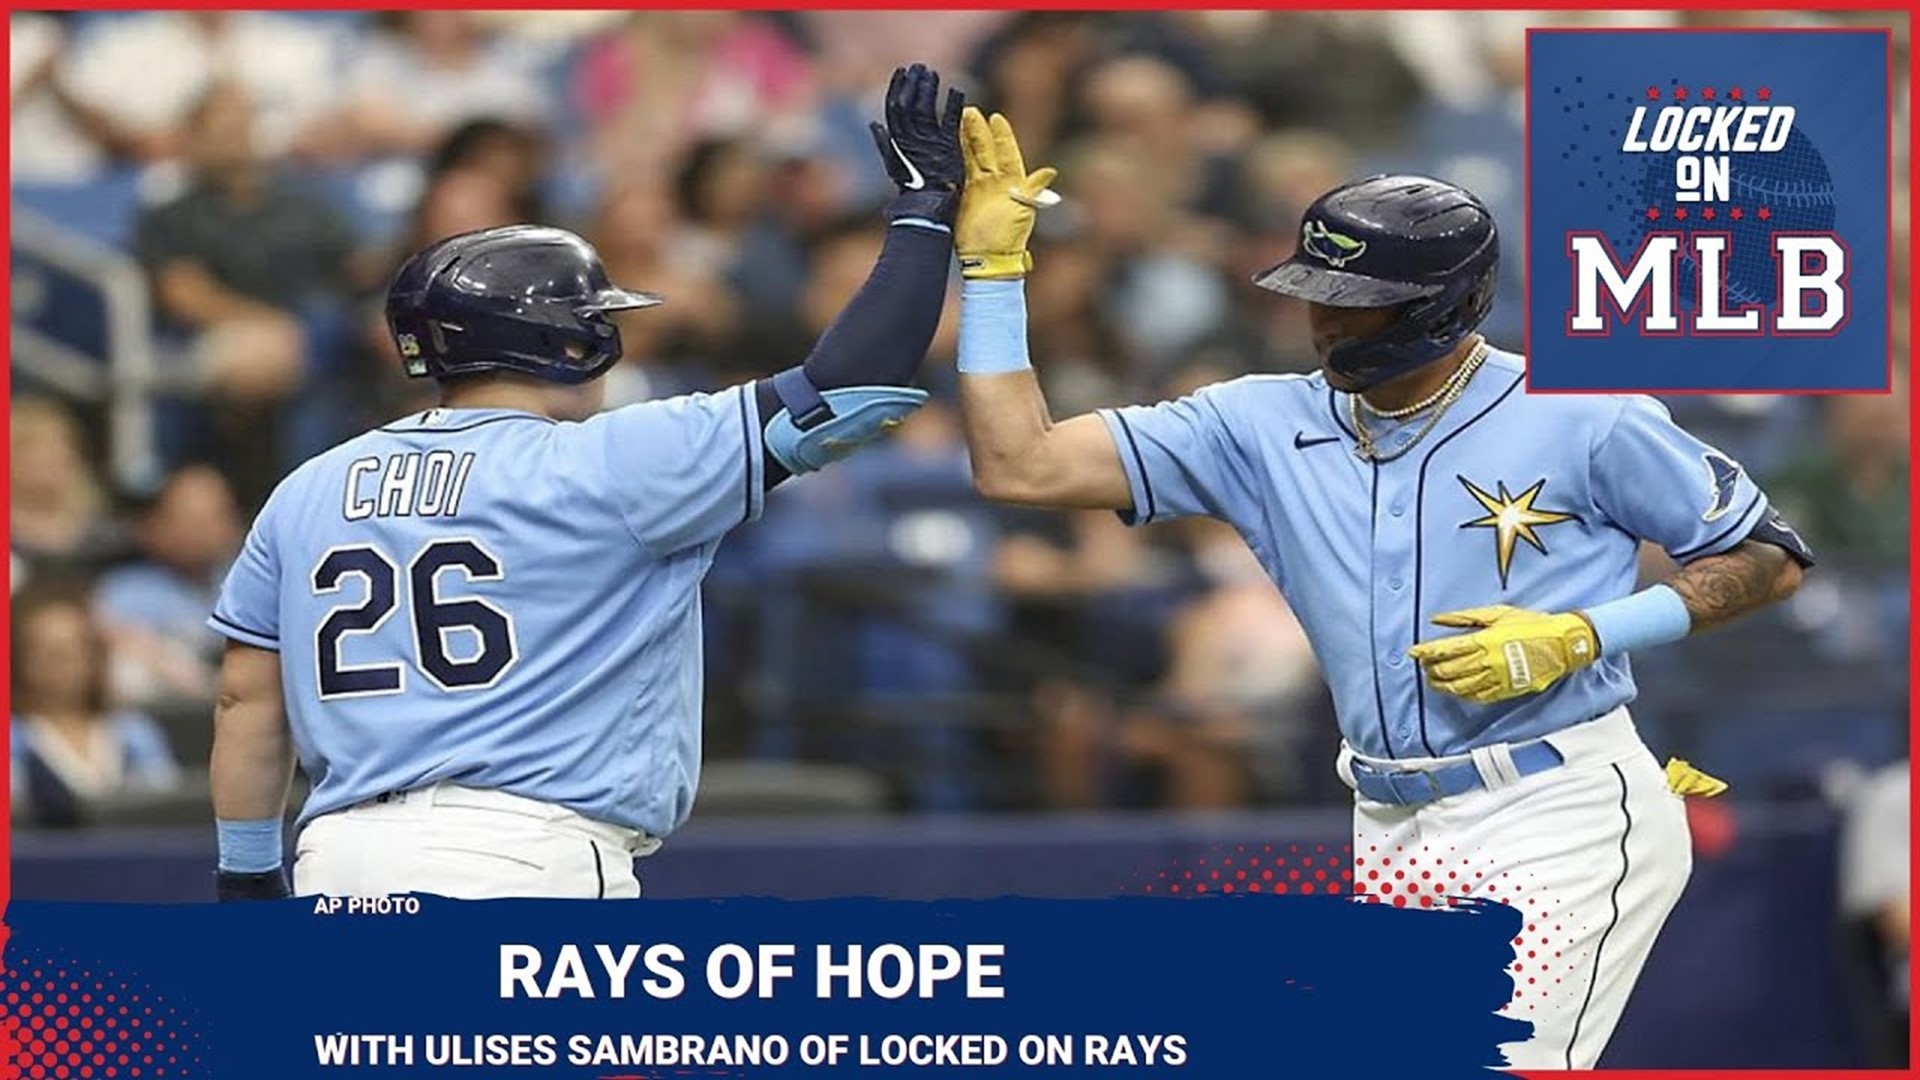 Locked on MLB - Rays of Hope in Tampa Bay with Ulises Sambrano of Locked on Rays - January 11, 2023